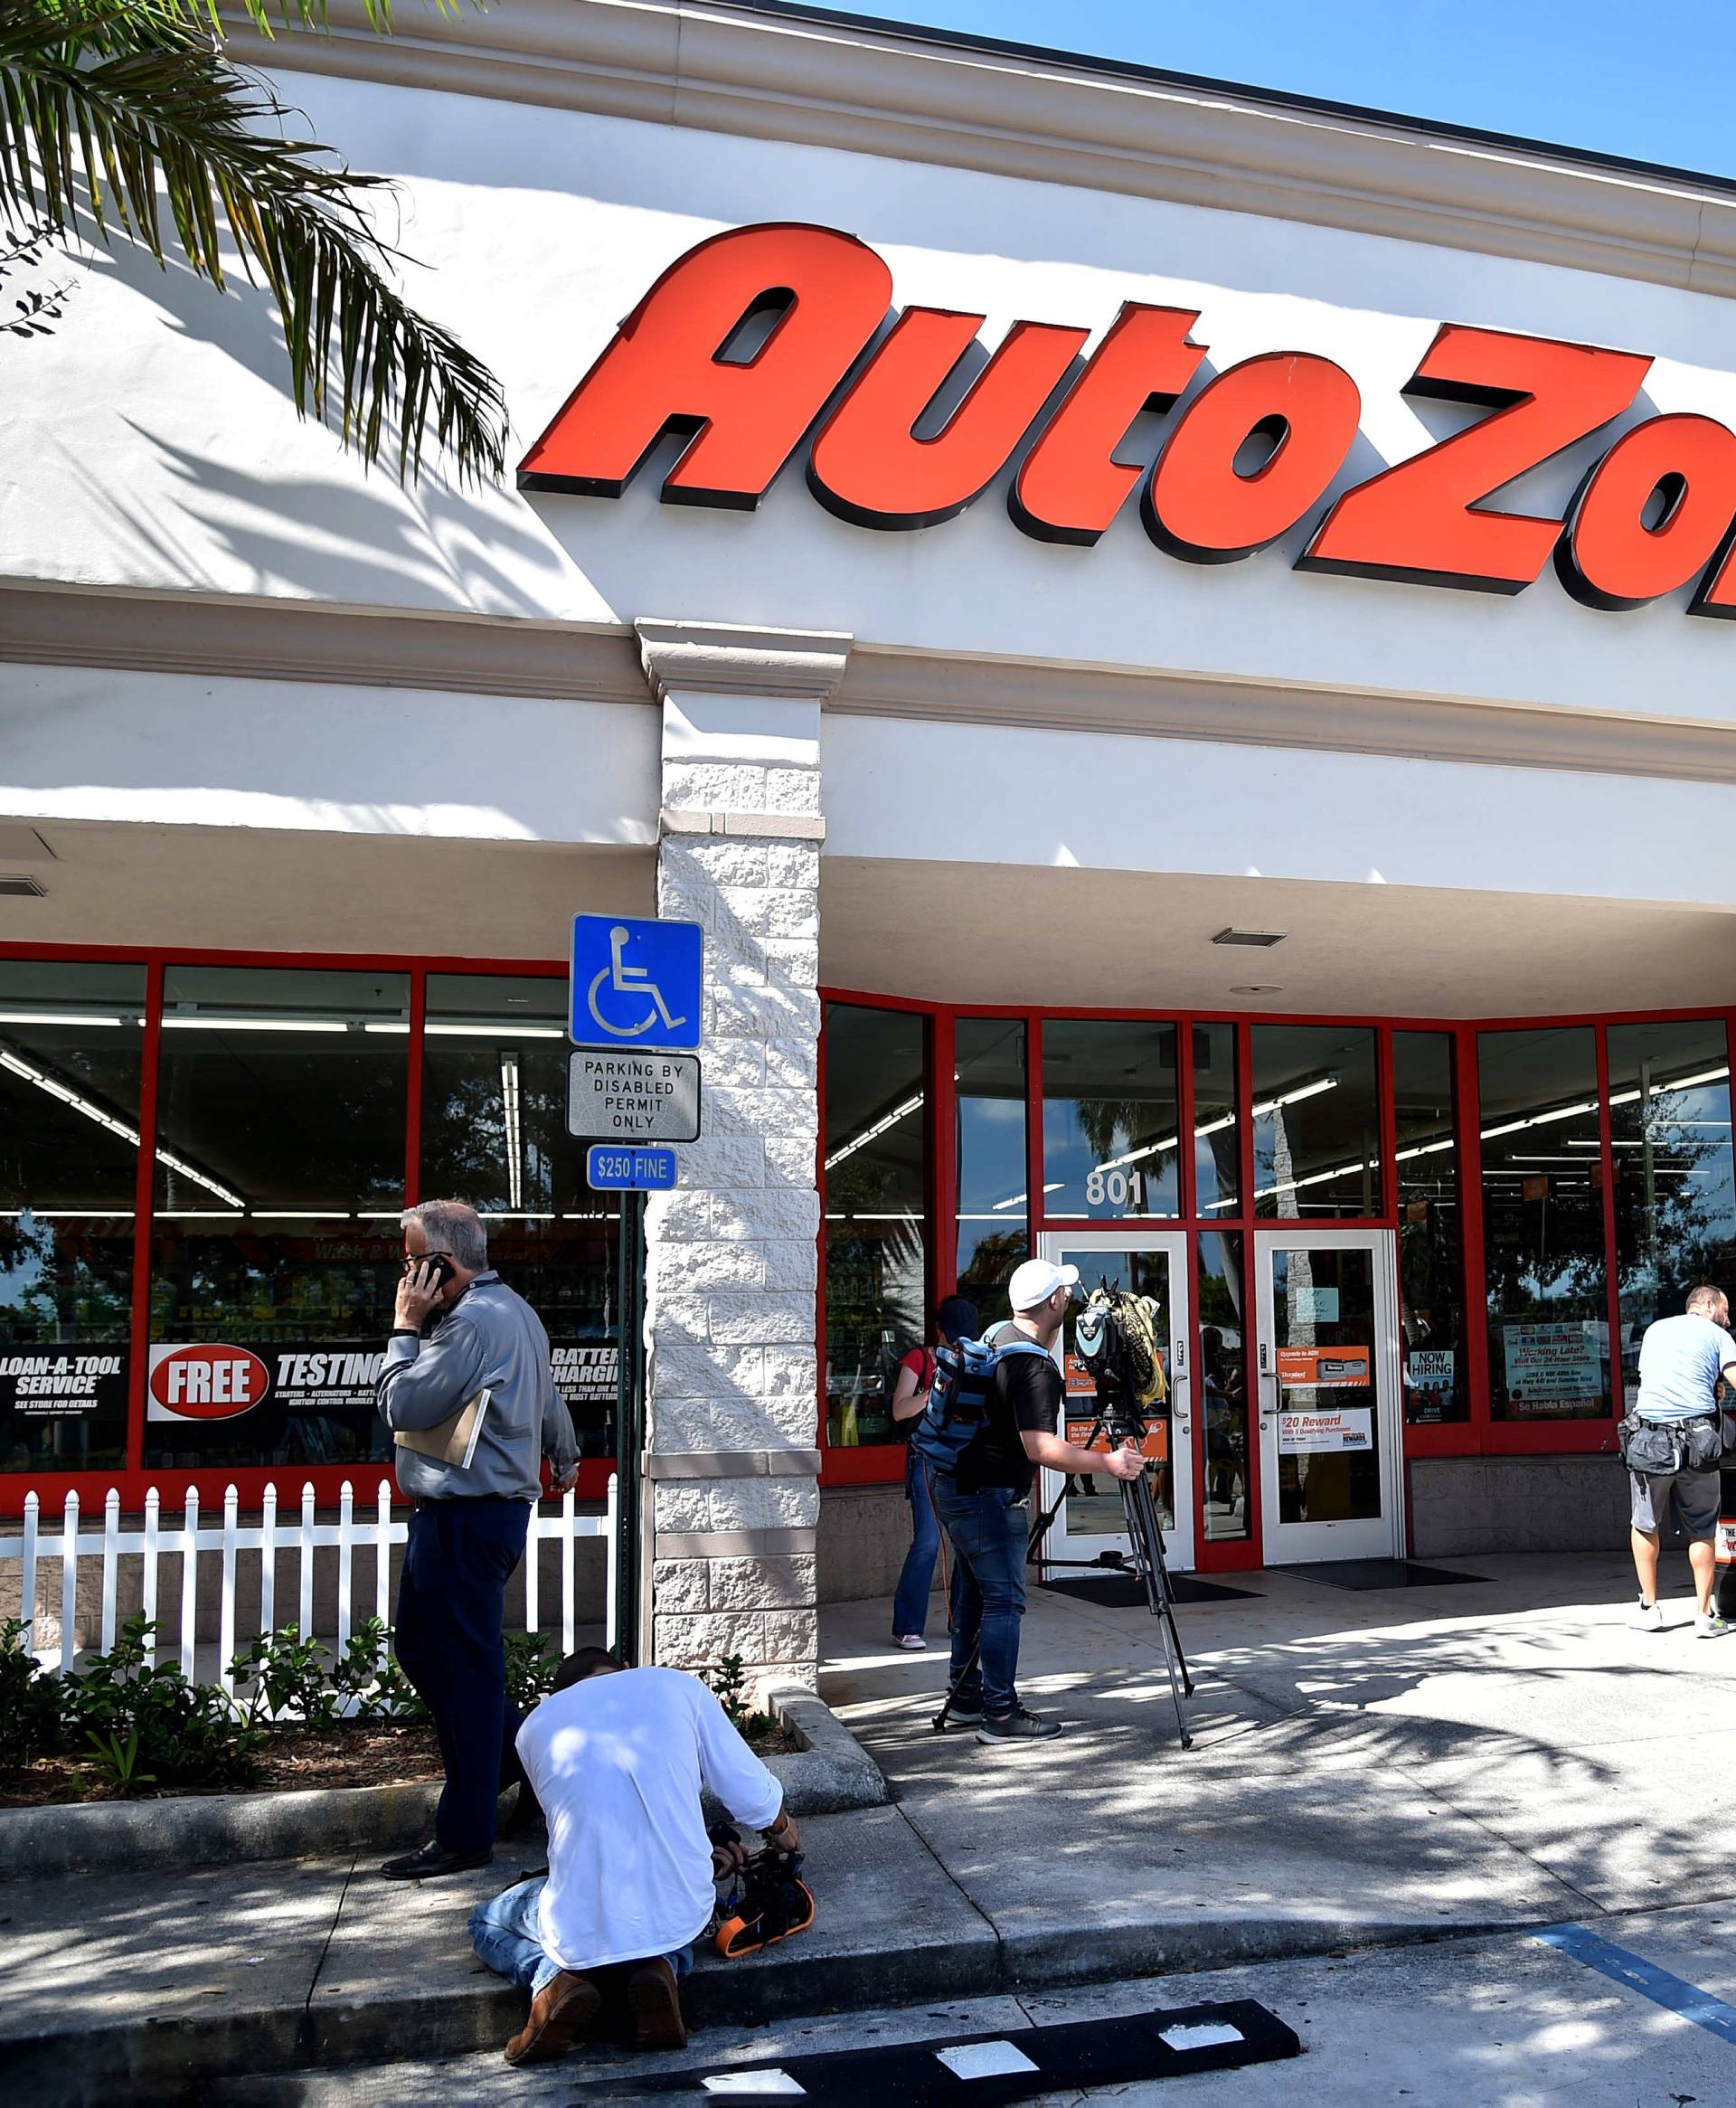 Members of the media are seen outside the Auto Zone store where a suspect involved in an investigation into a string of parcel bombs was apprehended, in Plantation, Florida